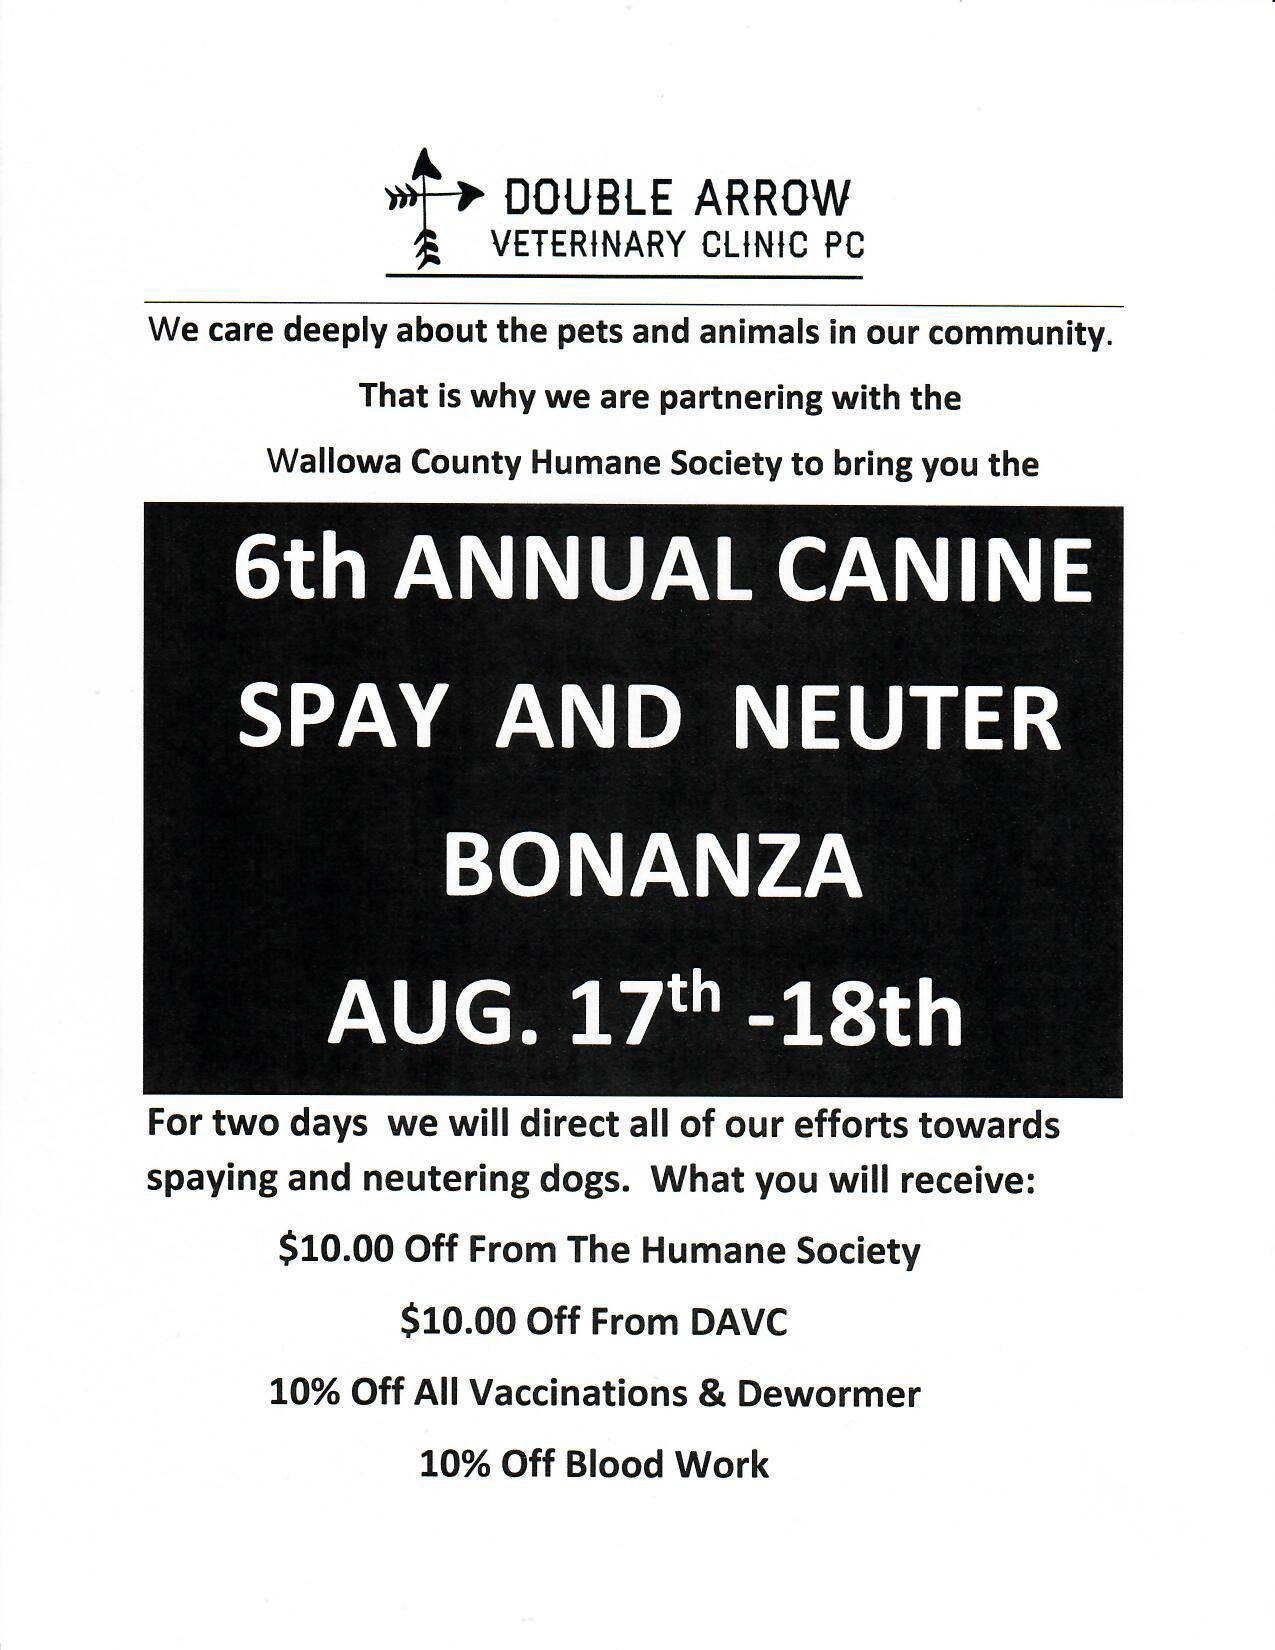 Canine spay and neuter extravaganza 2021